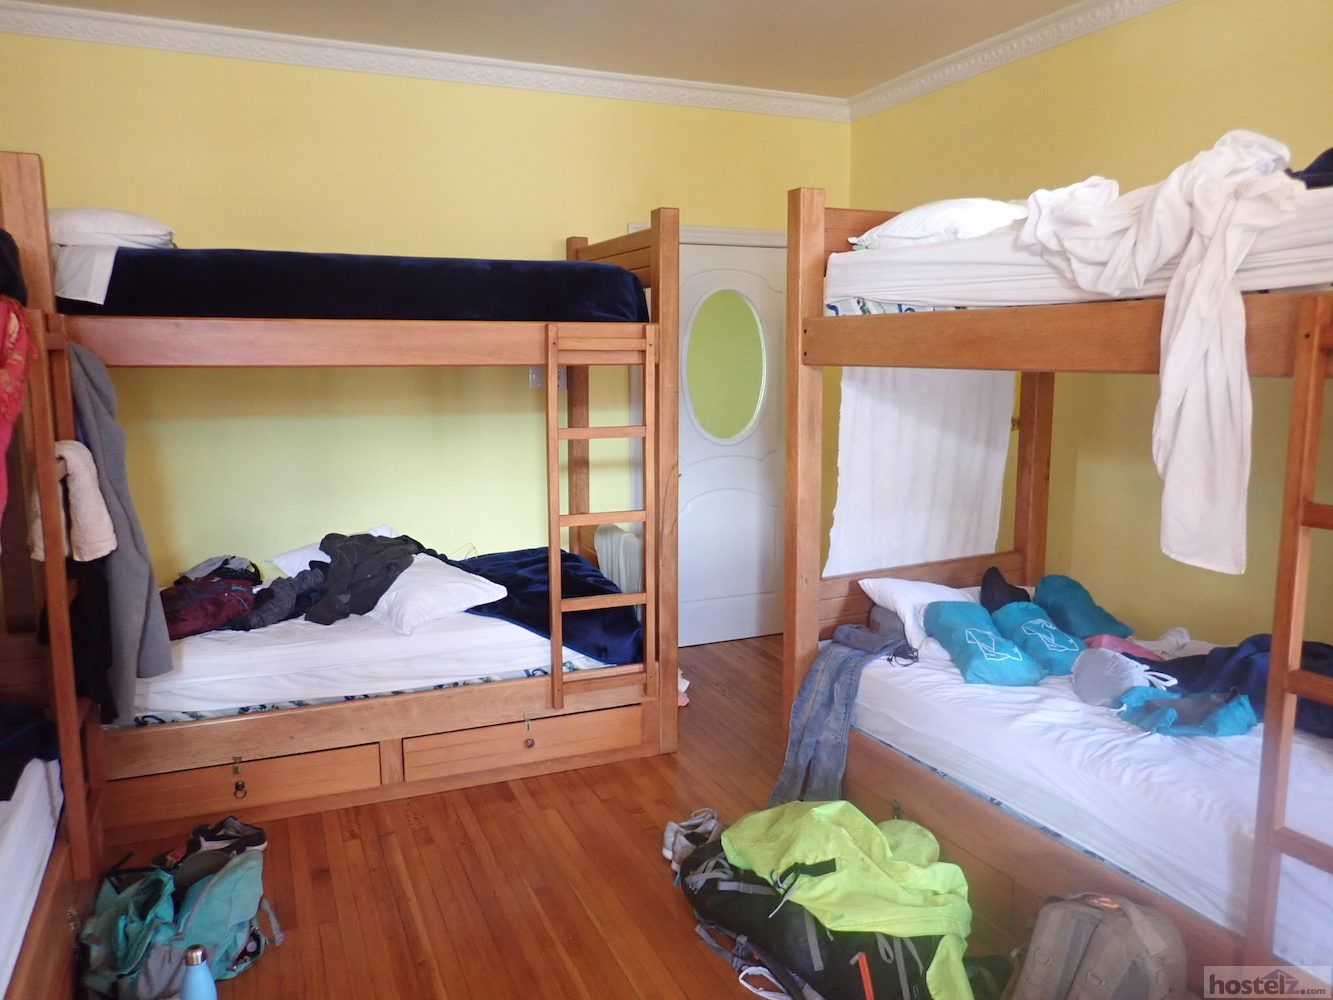 The largest dorm room: With a lot of guests, it can get messy at times but beds are clean and comfy